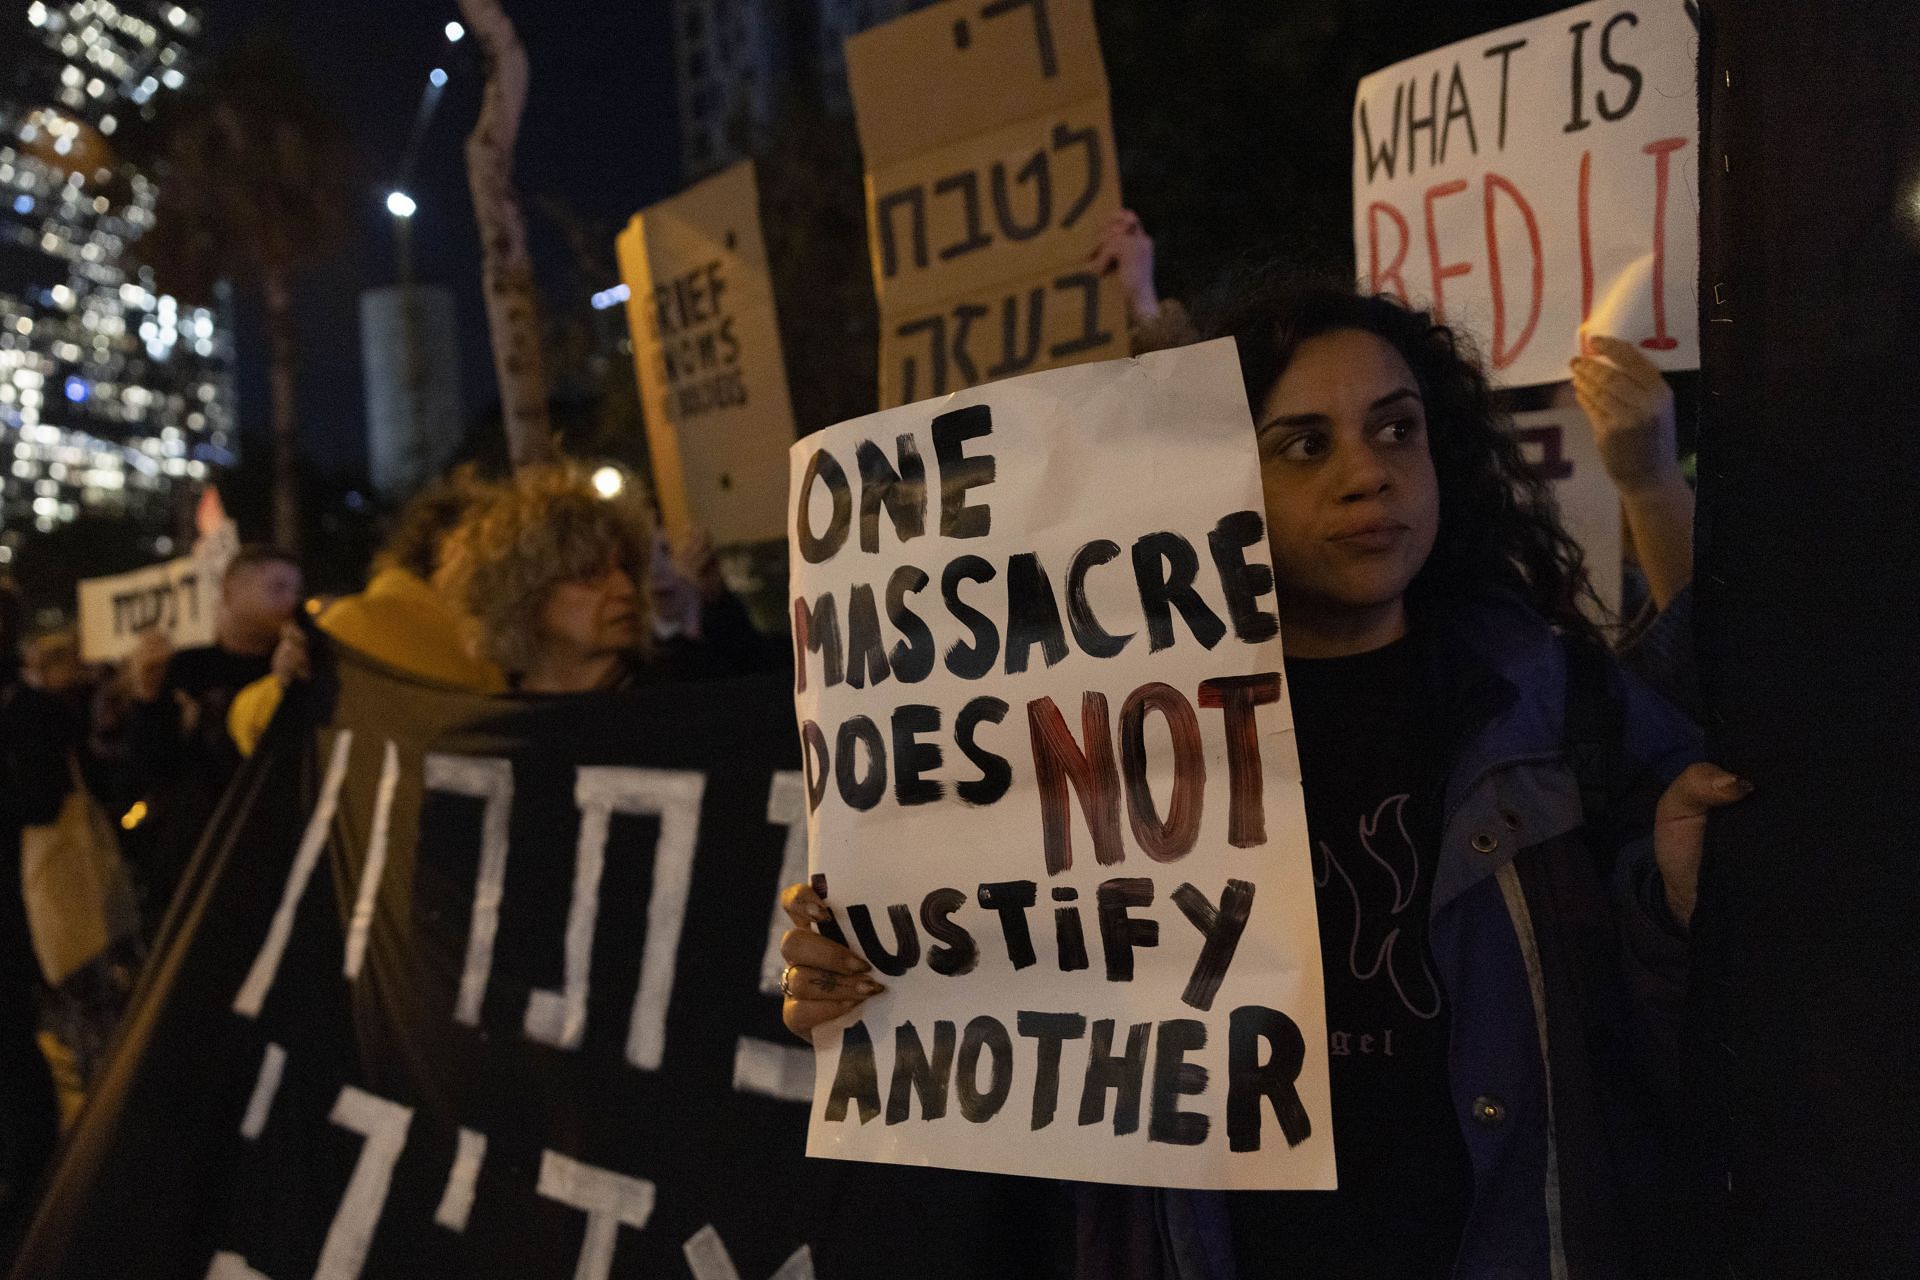 Israelis hold anti-government protests and call for a ceasefire in Gaza (Image via Getty Images)